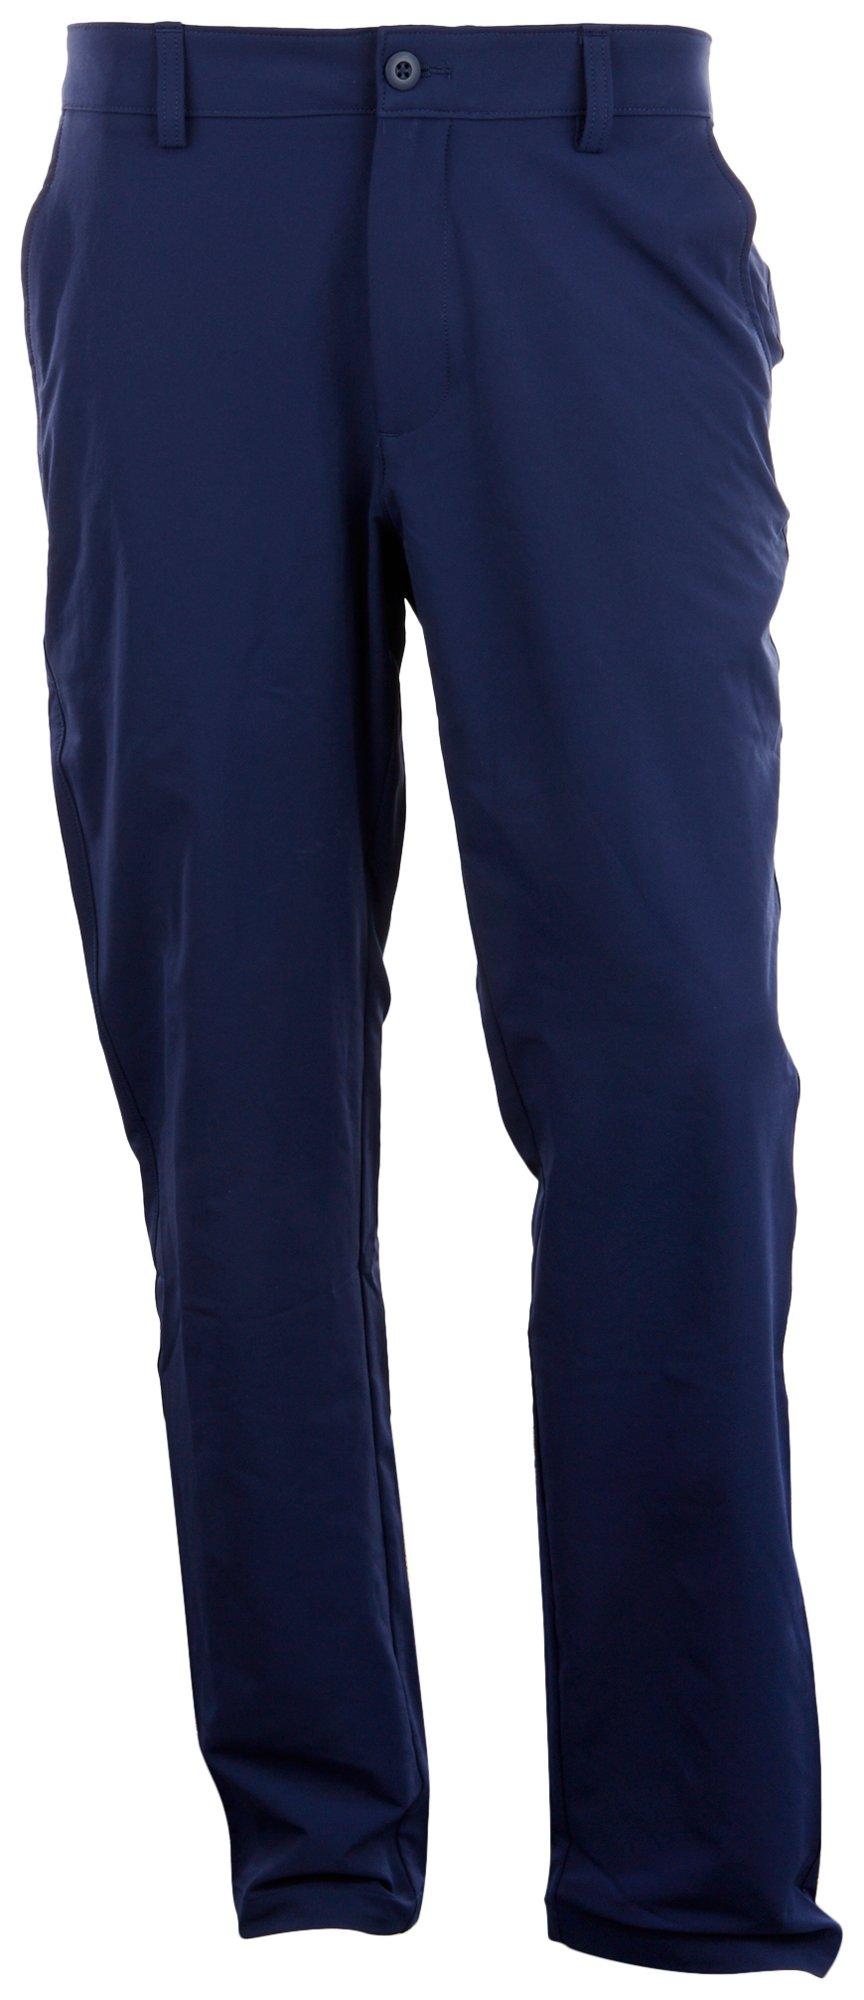 Under Armour Mens Active Flat Front Tapered Pants